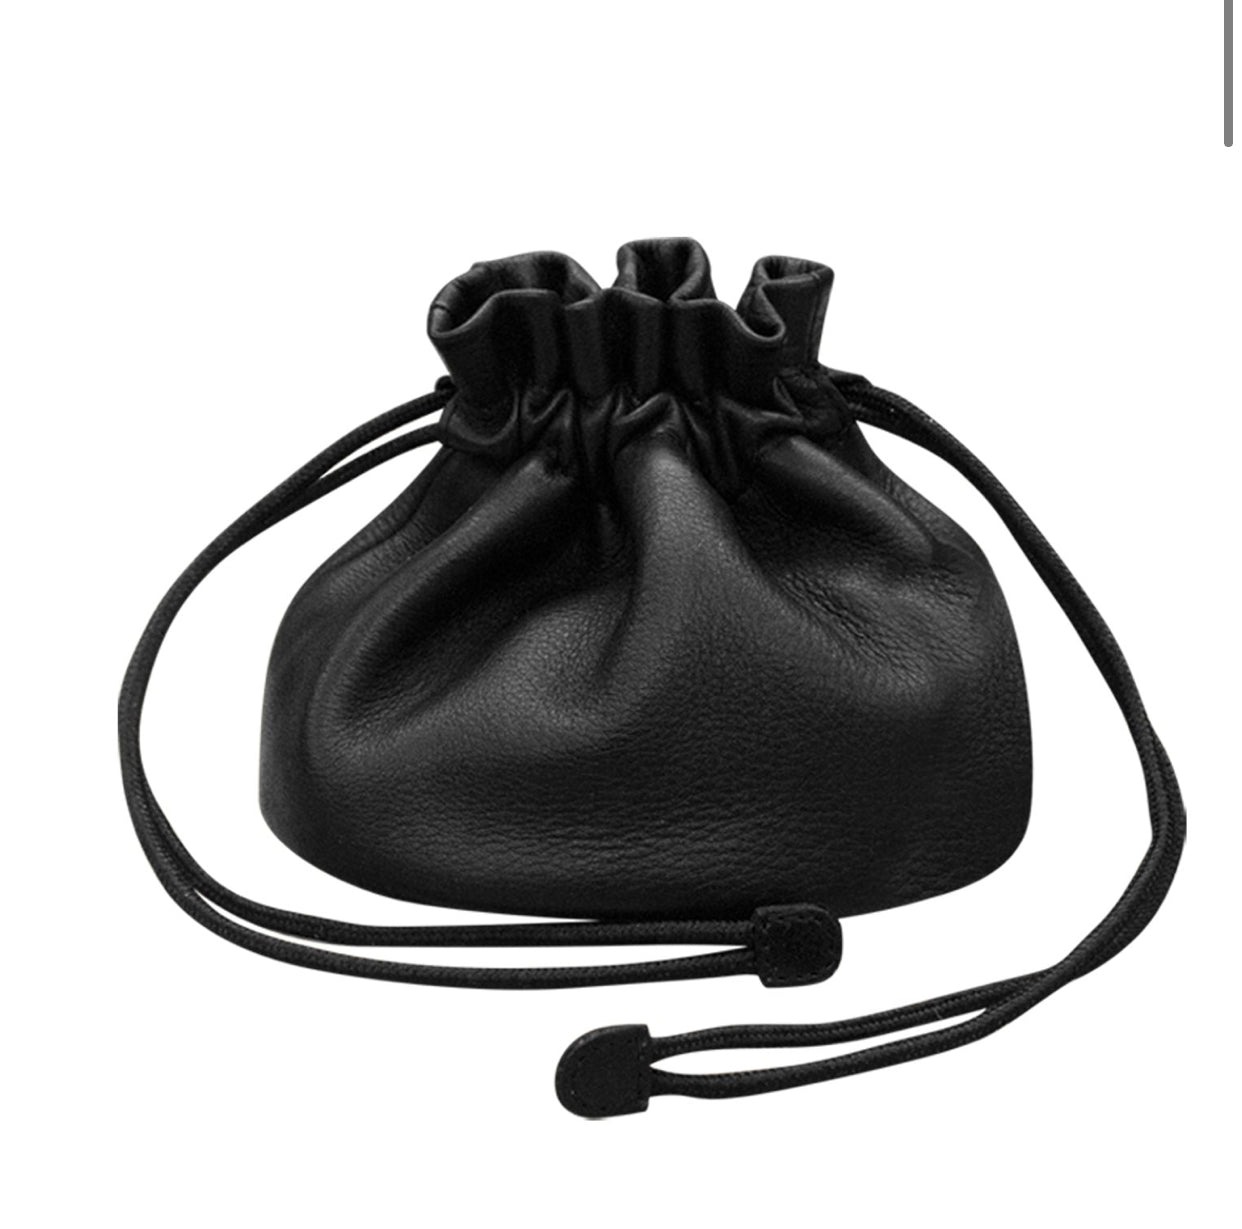 Flat Leather Drawstring Pouch - Tech Accessories, Makeup, Jewelry Holder, MicroSuede Lining - Black Onyx - Personalized Holiday Gifts, Leatherology